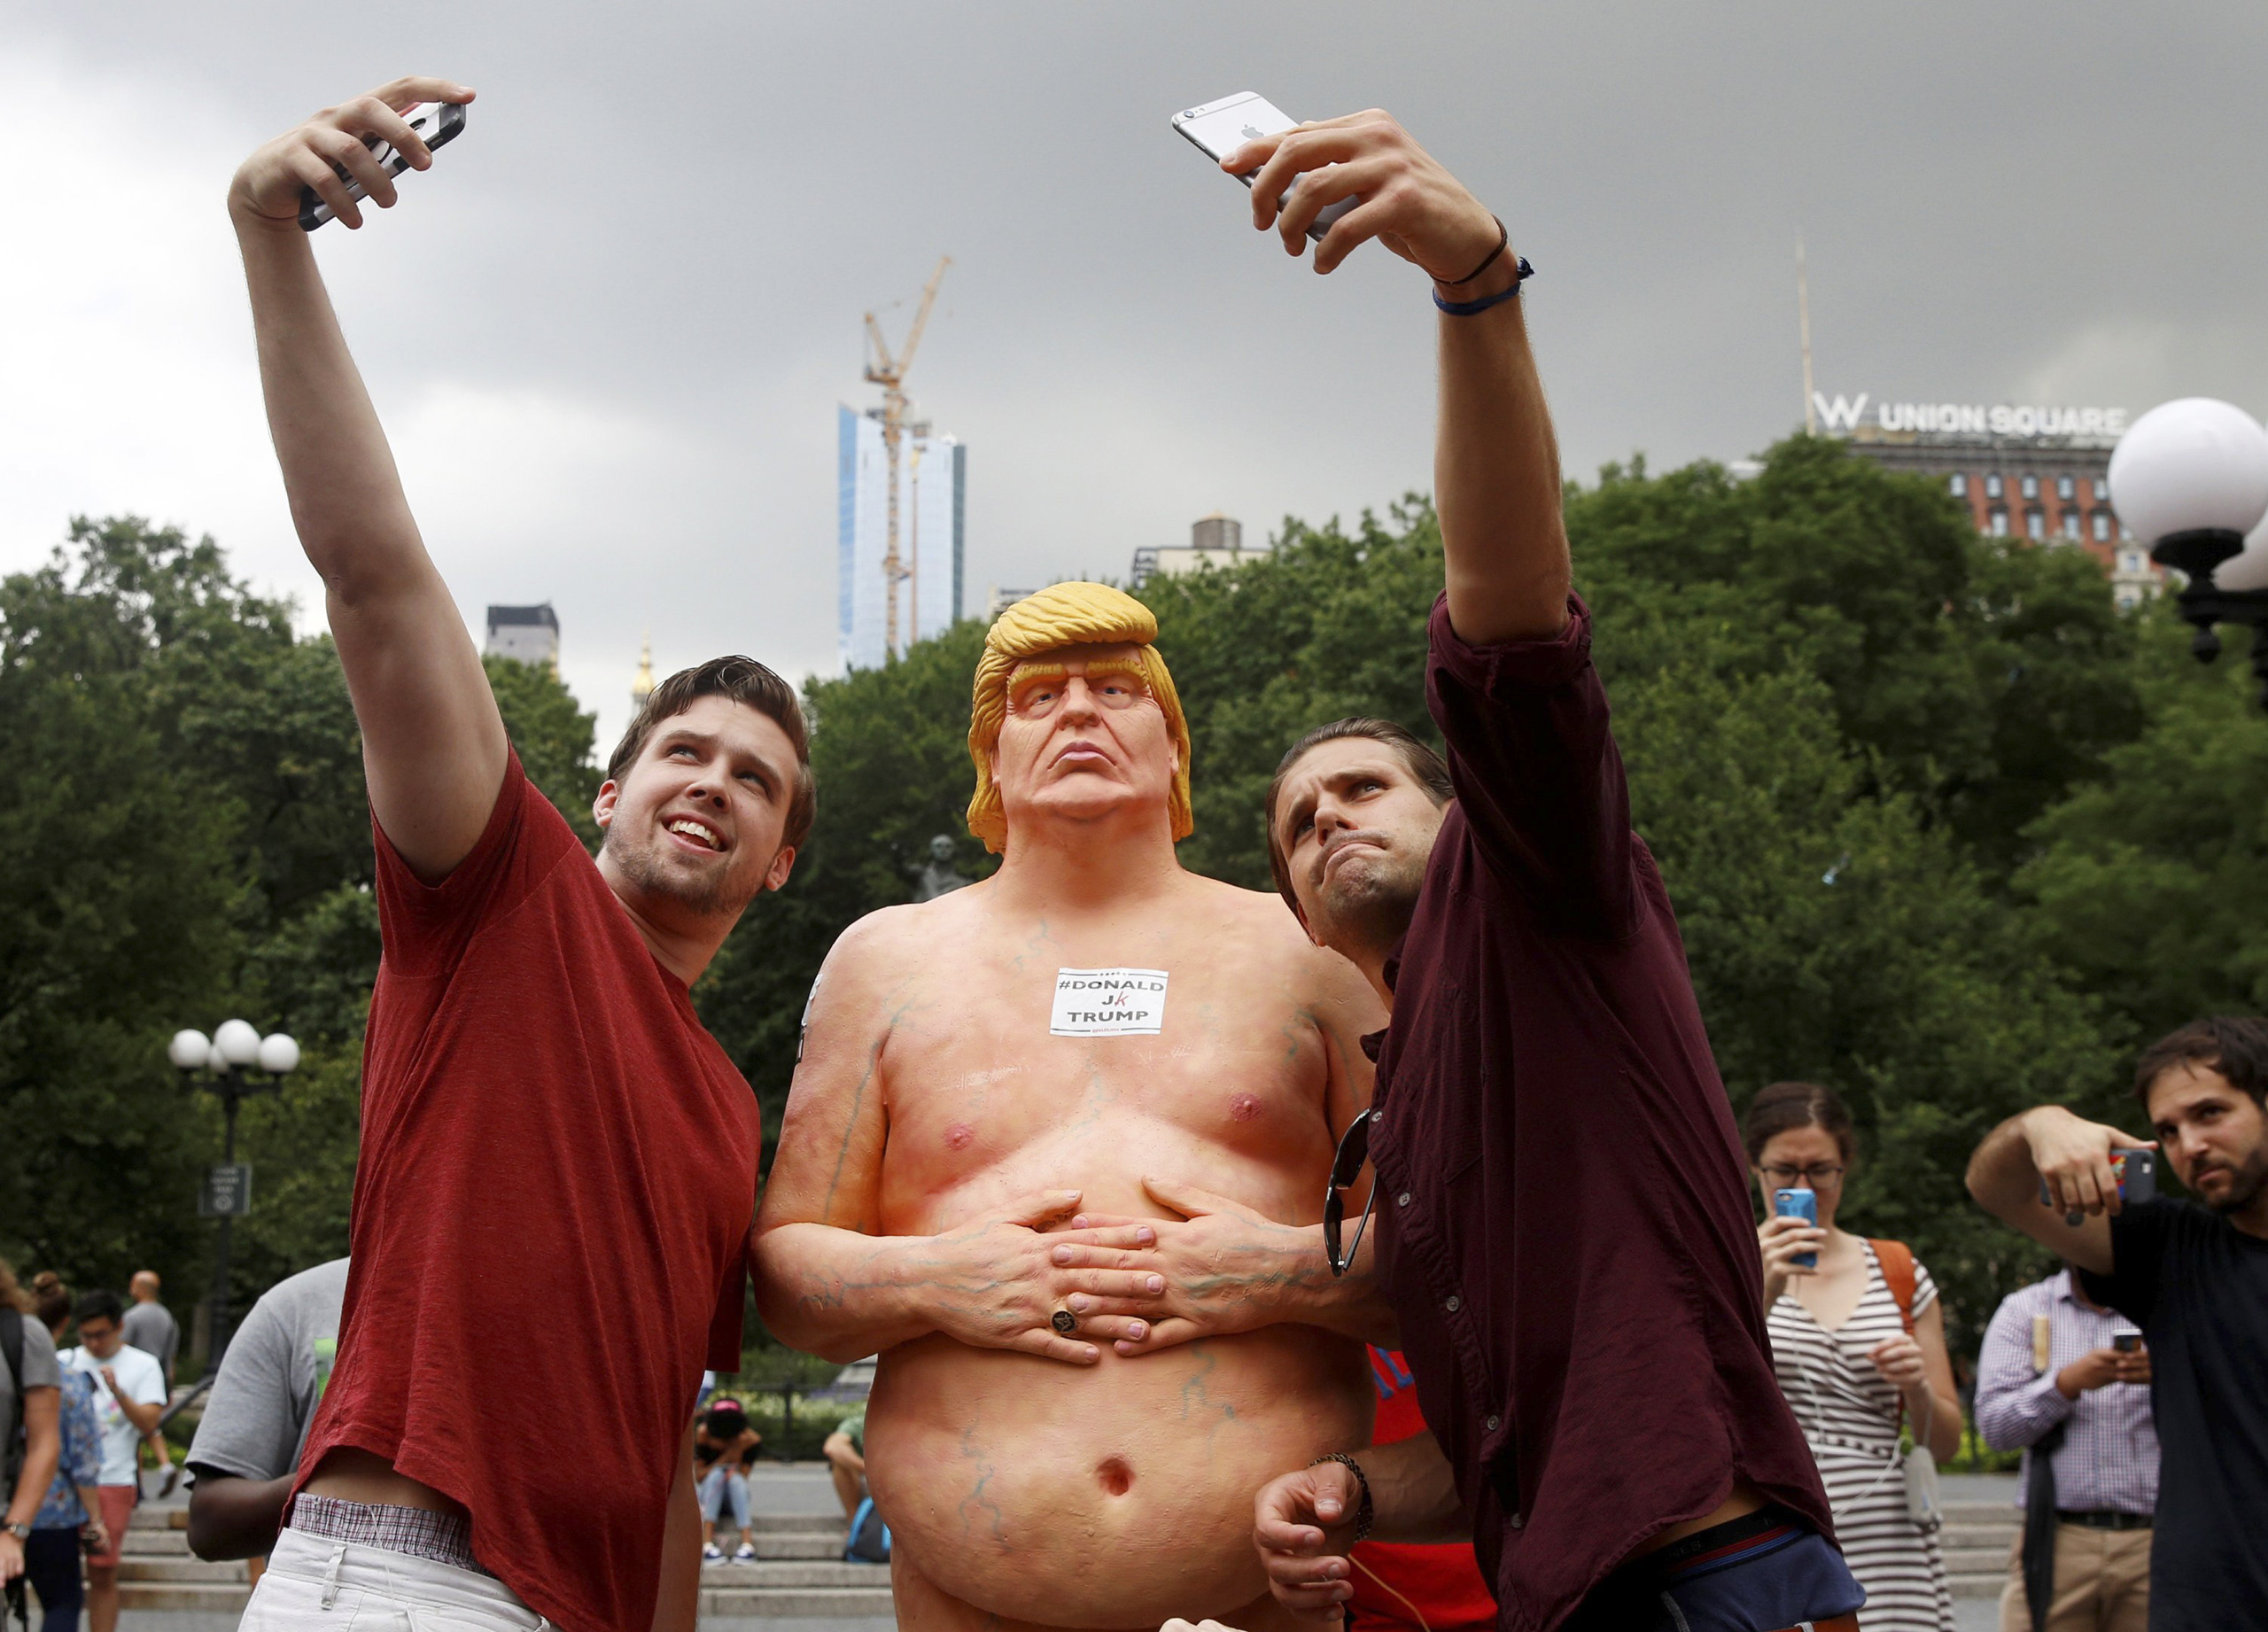 People pose for selfies with a naked statue of U.S. Republican presidential nominee Donald Trump that was left in Union Square Park in New York City on Aug. 18, 2016. (Brendan McDermid—Reuters)